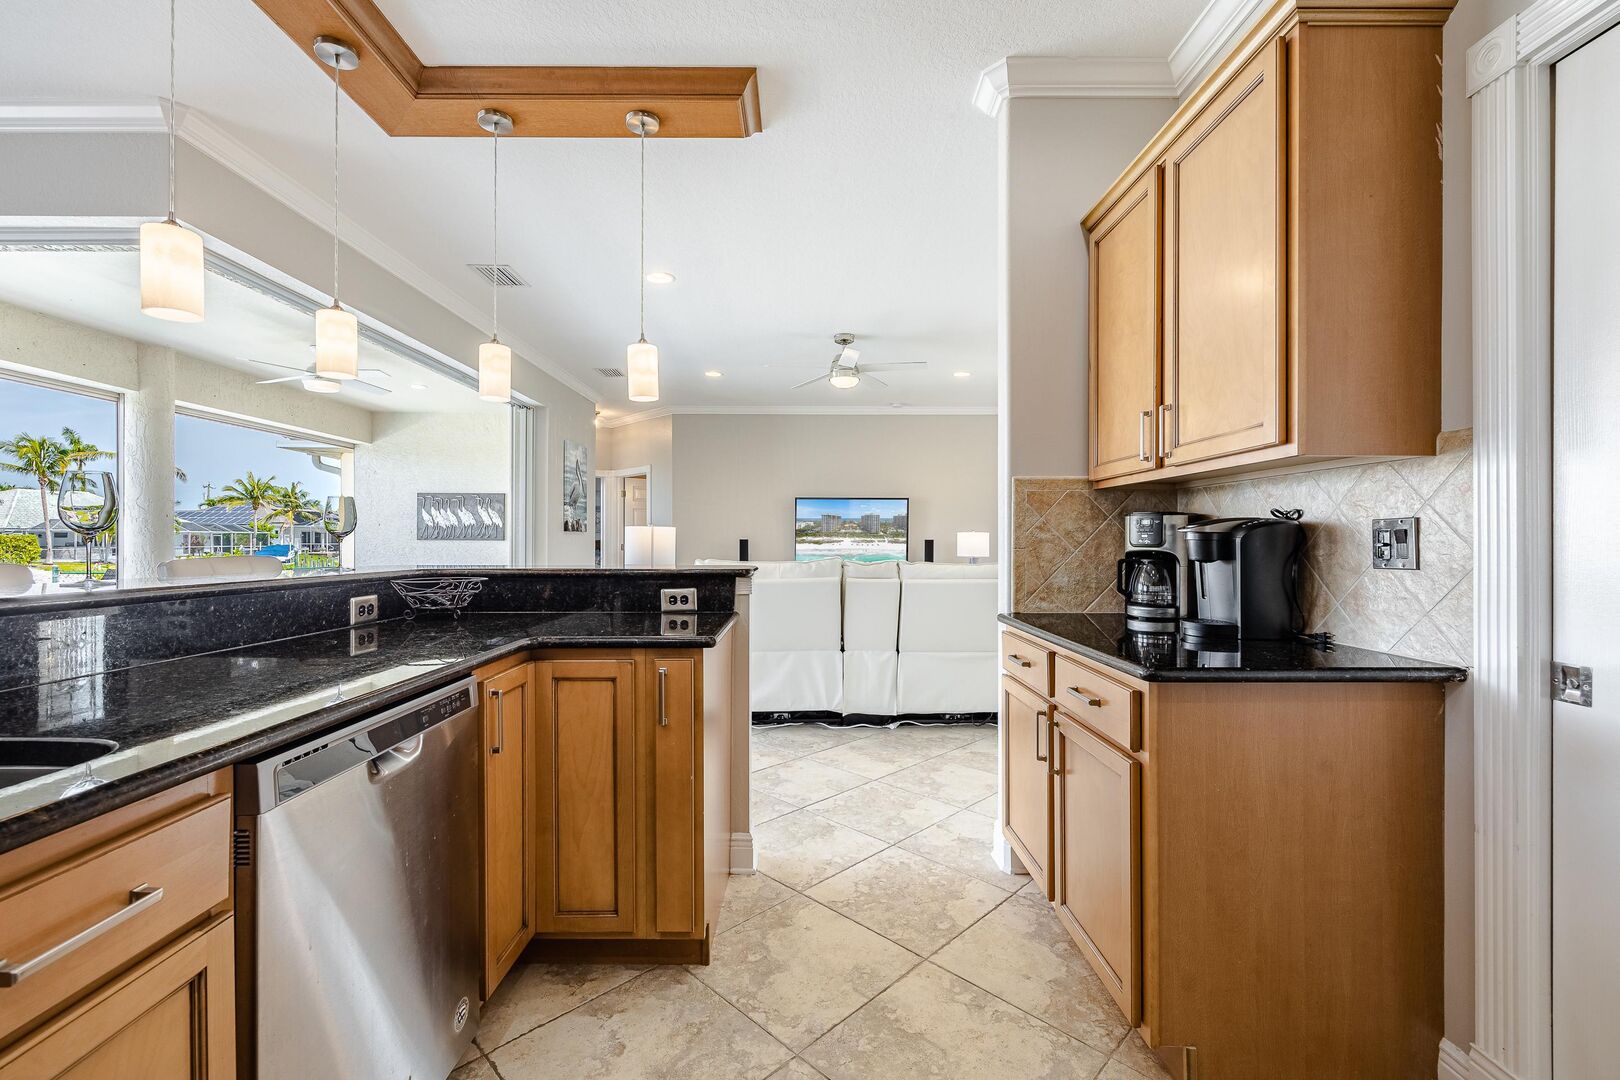 Vacation rental with full kitchen